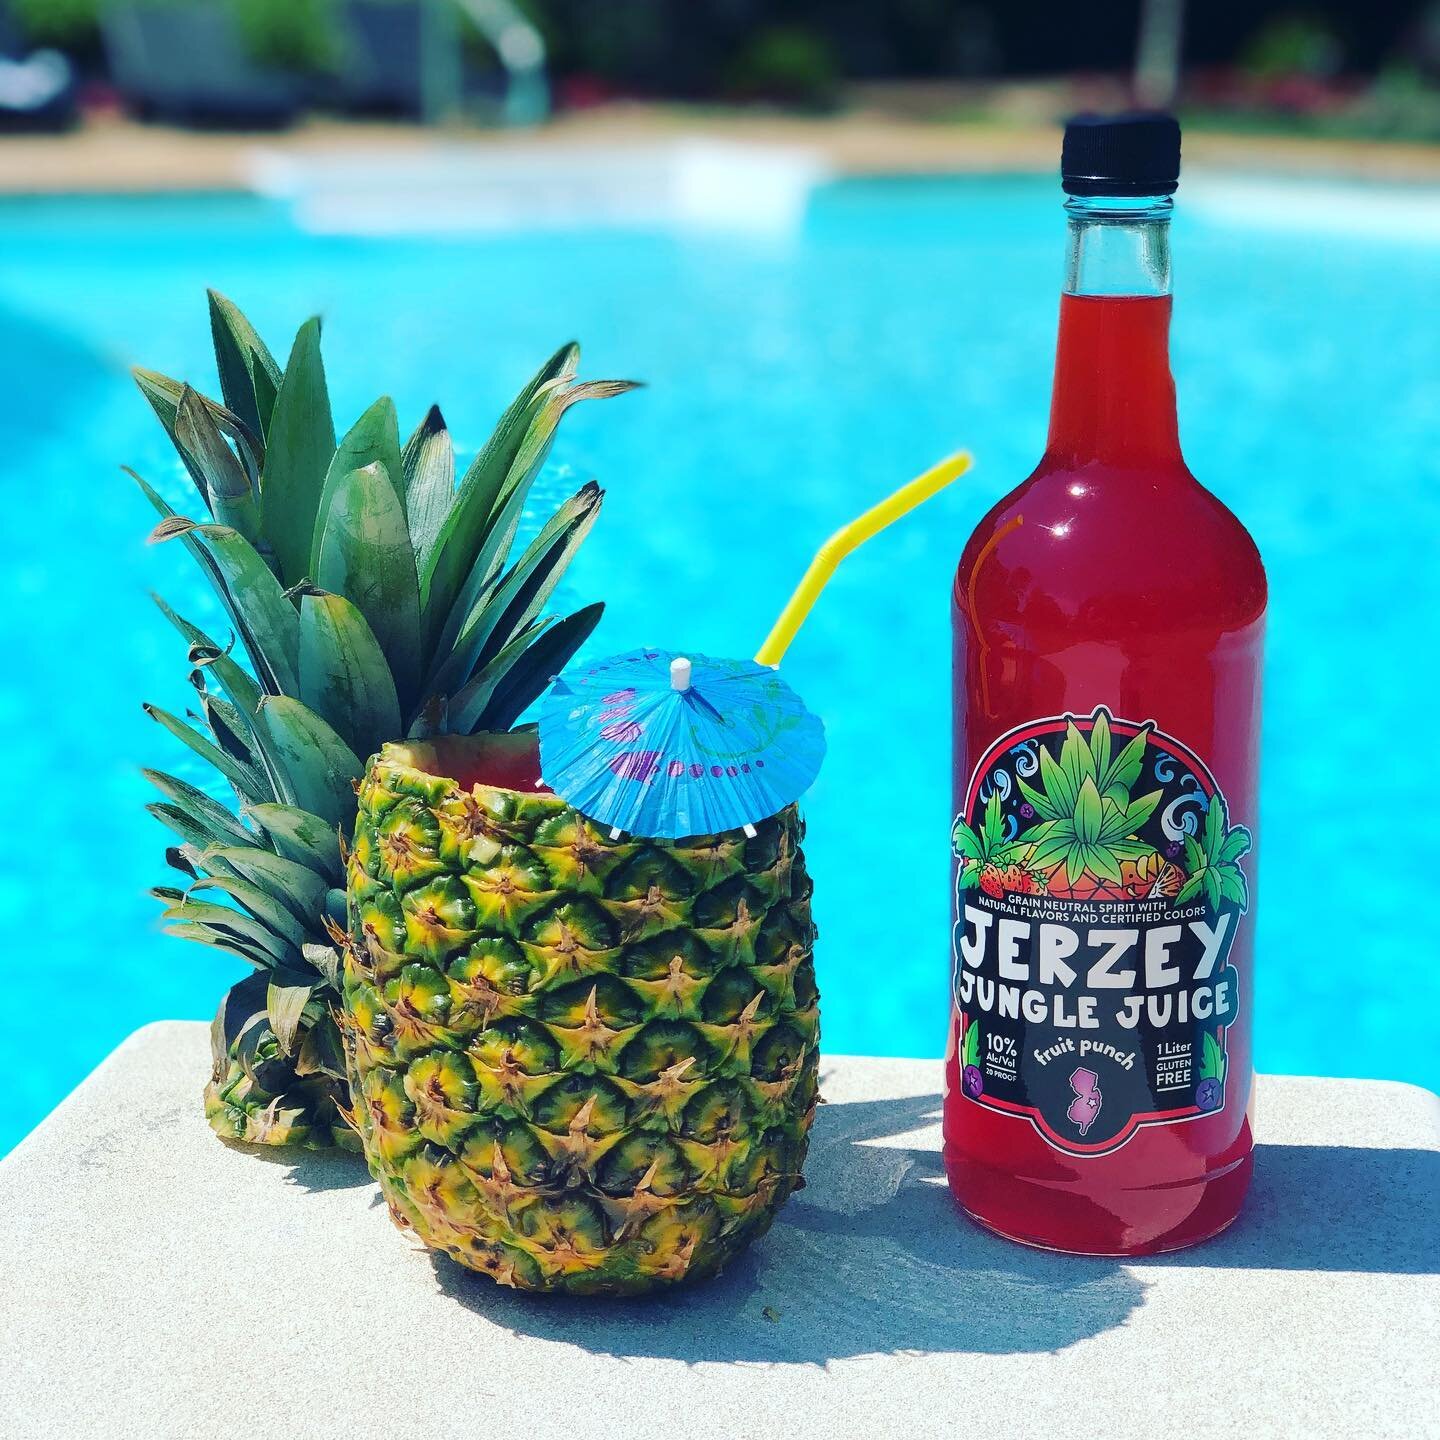 It&rsquo;s Friday And I&rsquo;m Thirsty! 🥵🍹🍍
&bull;
&bull;
Follow 👉@jerzeyjungle for the latest updates🔔

💥Link in bio for where to find and purchase a bottle💥

&bull;
&bull;
➖➖➖➖➖ ➖
#jerzeyjungle #jerzeyjunglejuice #partynj #cocktailsofinstag